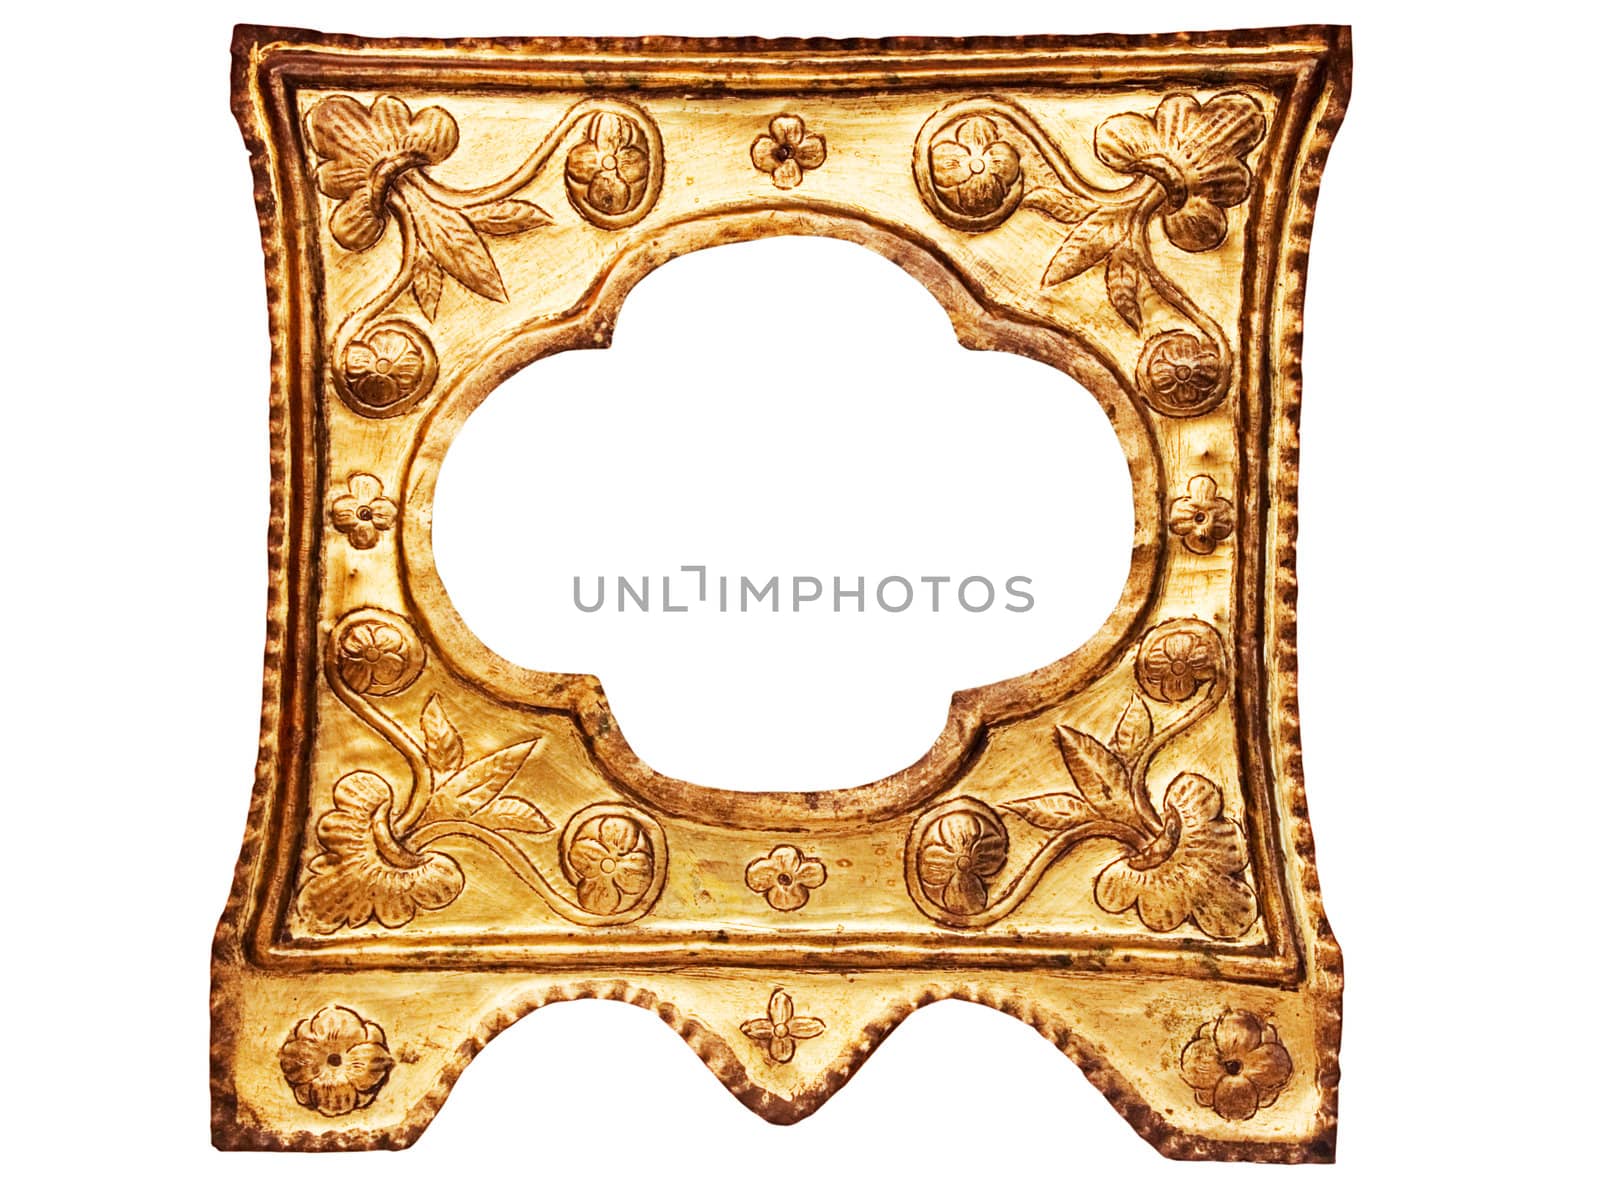 Small golden metal picture frame isolated on a white background. File contains clipping path.